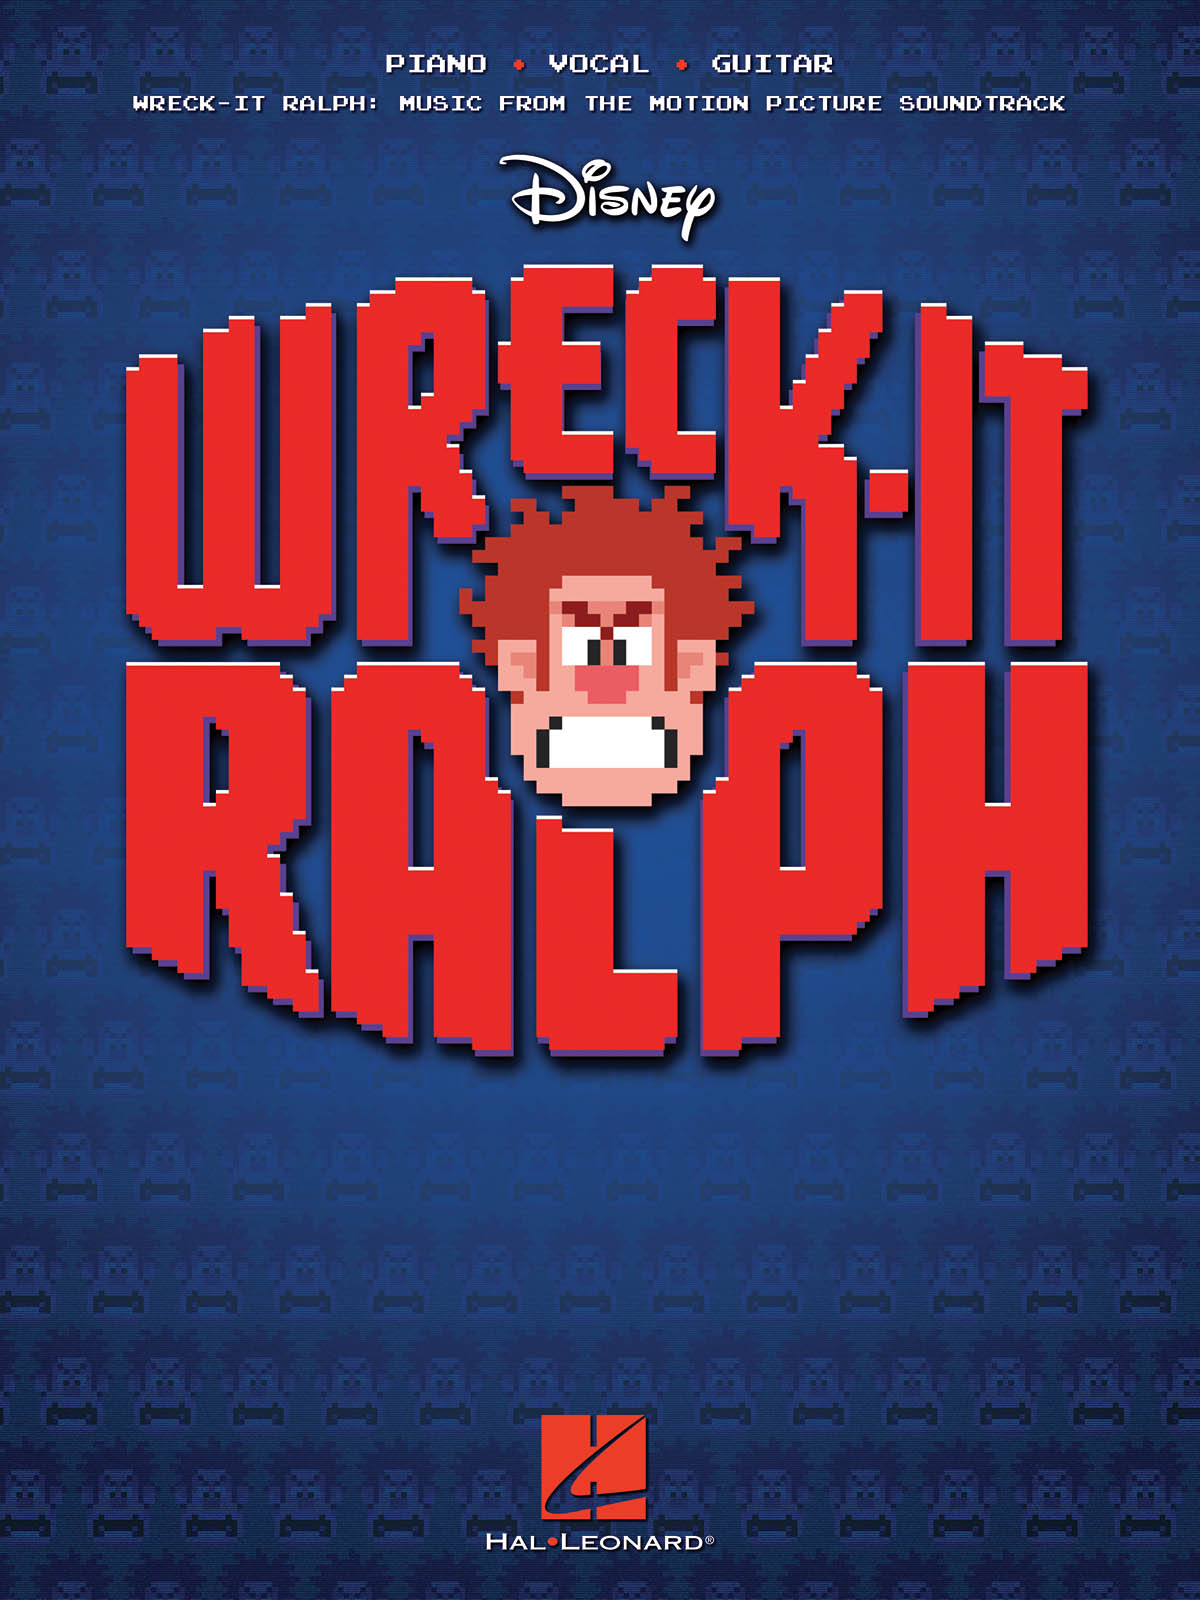 Henry Jackman: Wreck-It Ralph: Music From the Motion Picture: Piano  Vocal and